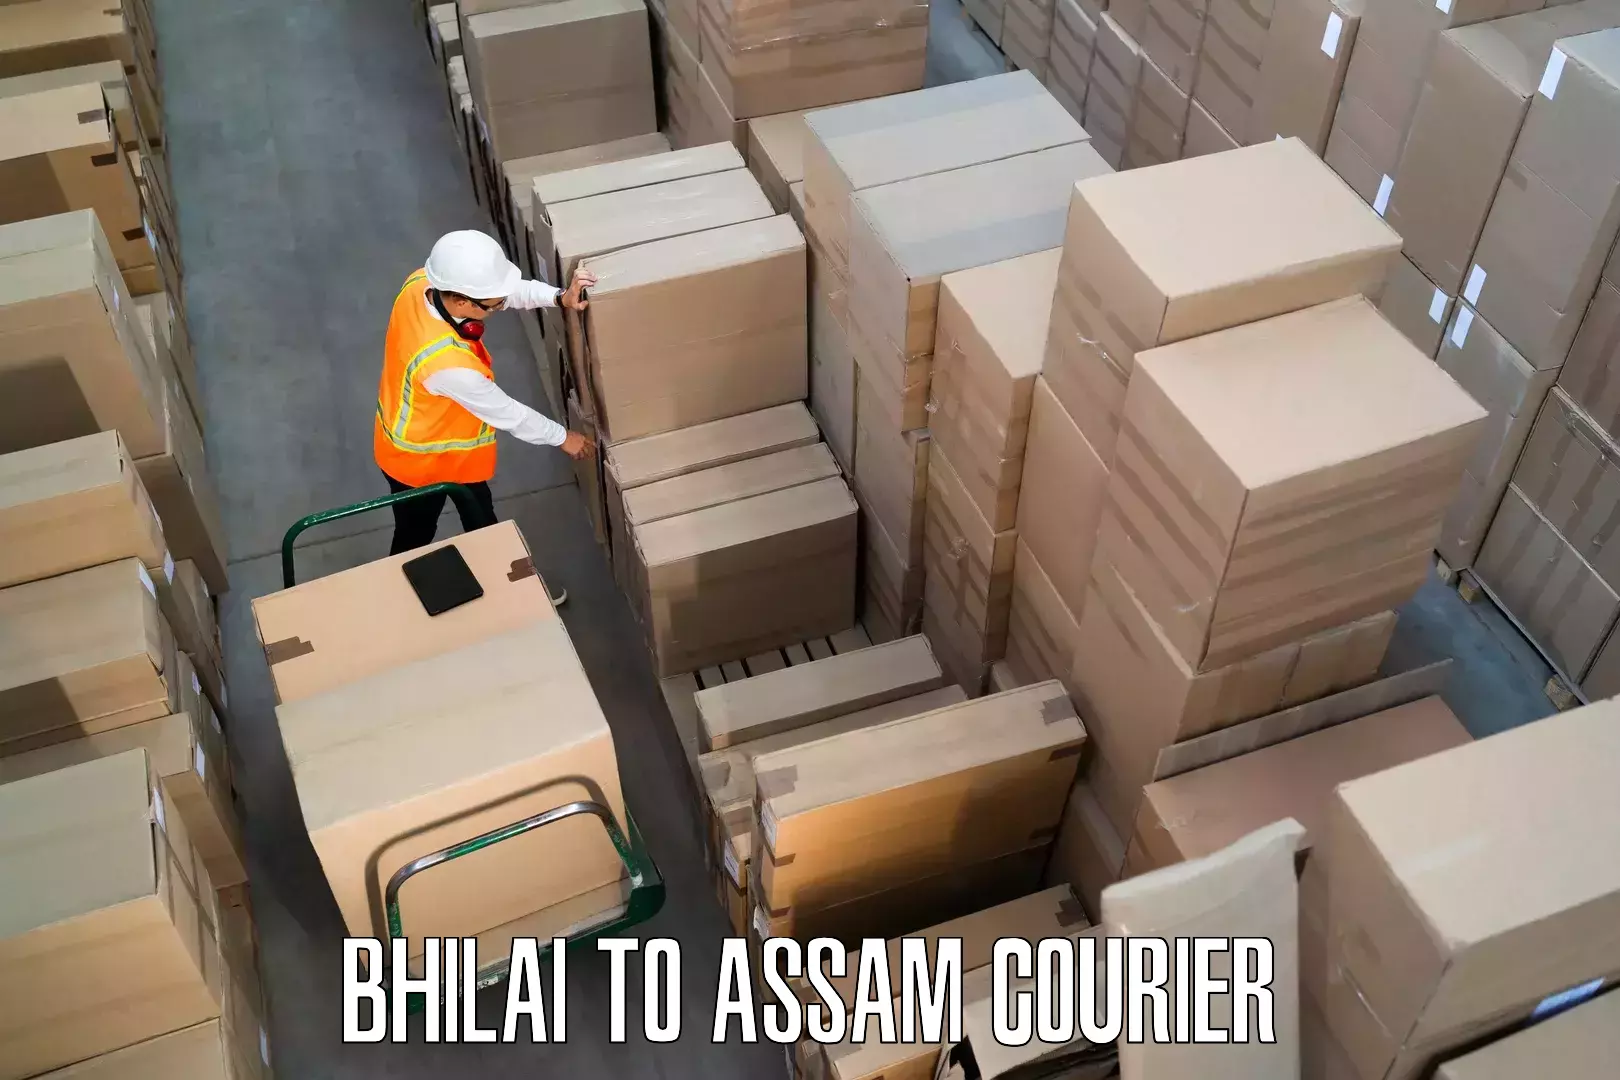 Furniture delivery service Bhilai to Darrang